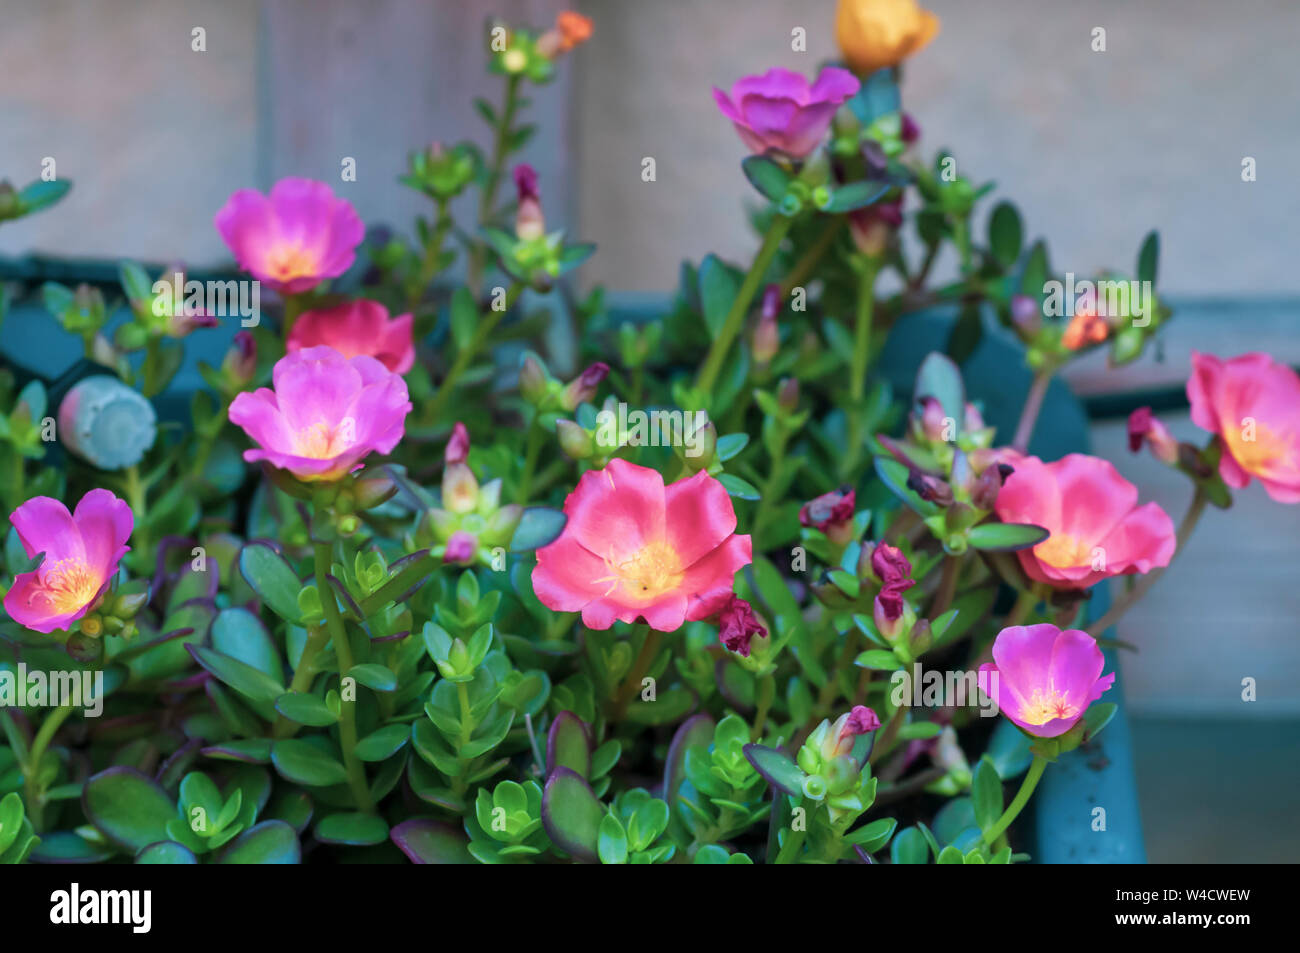 Sun plant (Portulaca). Closeup of pink and orange flowers. in  a garden. Photographed in Israel in July Stock Photo